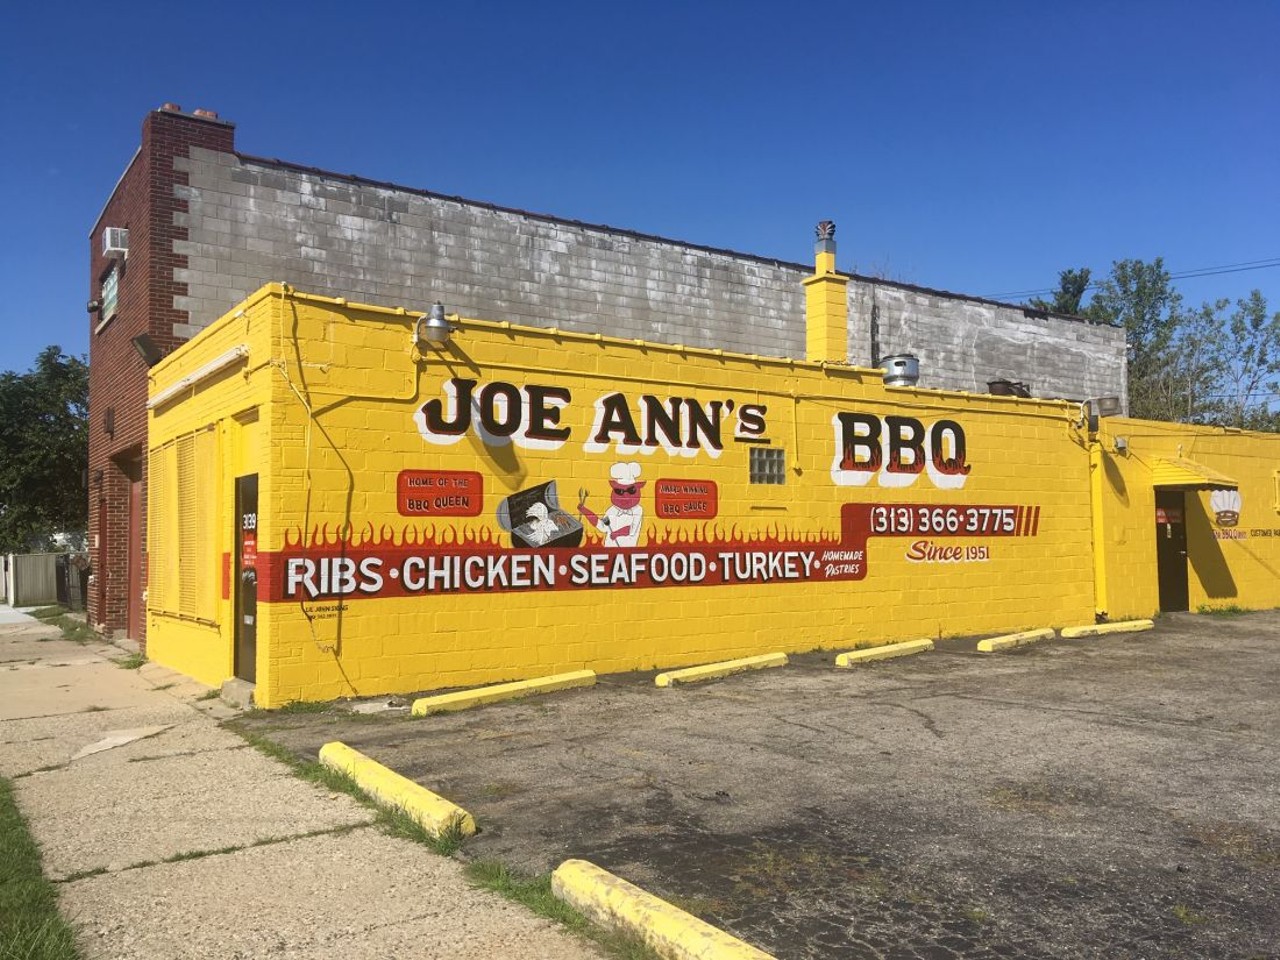 Joe Ann's
3139 Jerome St, Detroit; 313-366-3775
Joe Ann's is one of the longest-running barbecue operations in Detroit (if not the longest-running), first serving up its delicious 'cue 65 years ago. If you go to Joe Ann's bright yellow building that's decorated with a picture of a grillin' pig and a proclamation that the restaurant is the castle of Detroit's "BBQ Queen." The best place to start here is the chicken. The BBQ Queen knows her bird, which is moist and falls off the bone in a manner that isn't common in Detroit's barbecue joints.
Photo by Lee DeVito